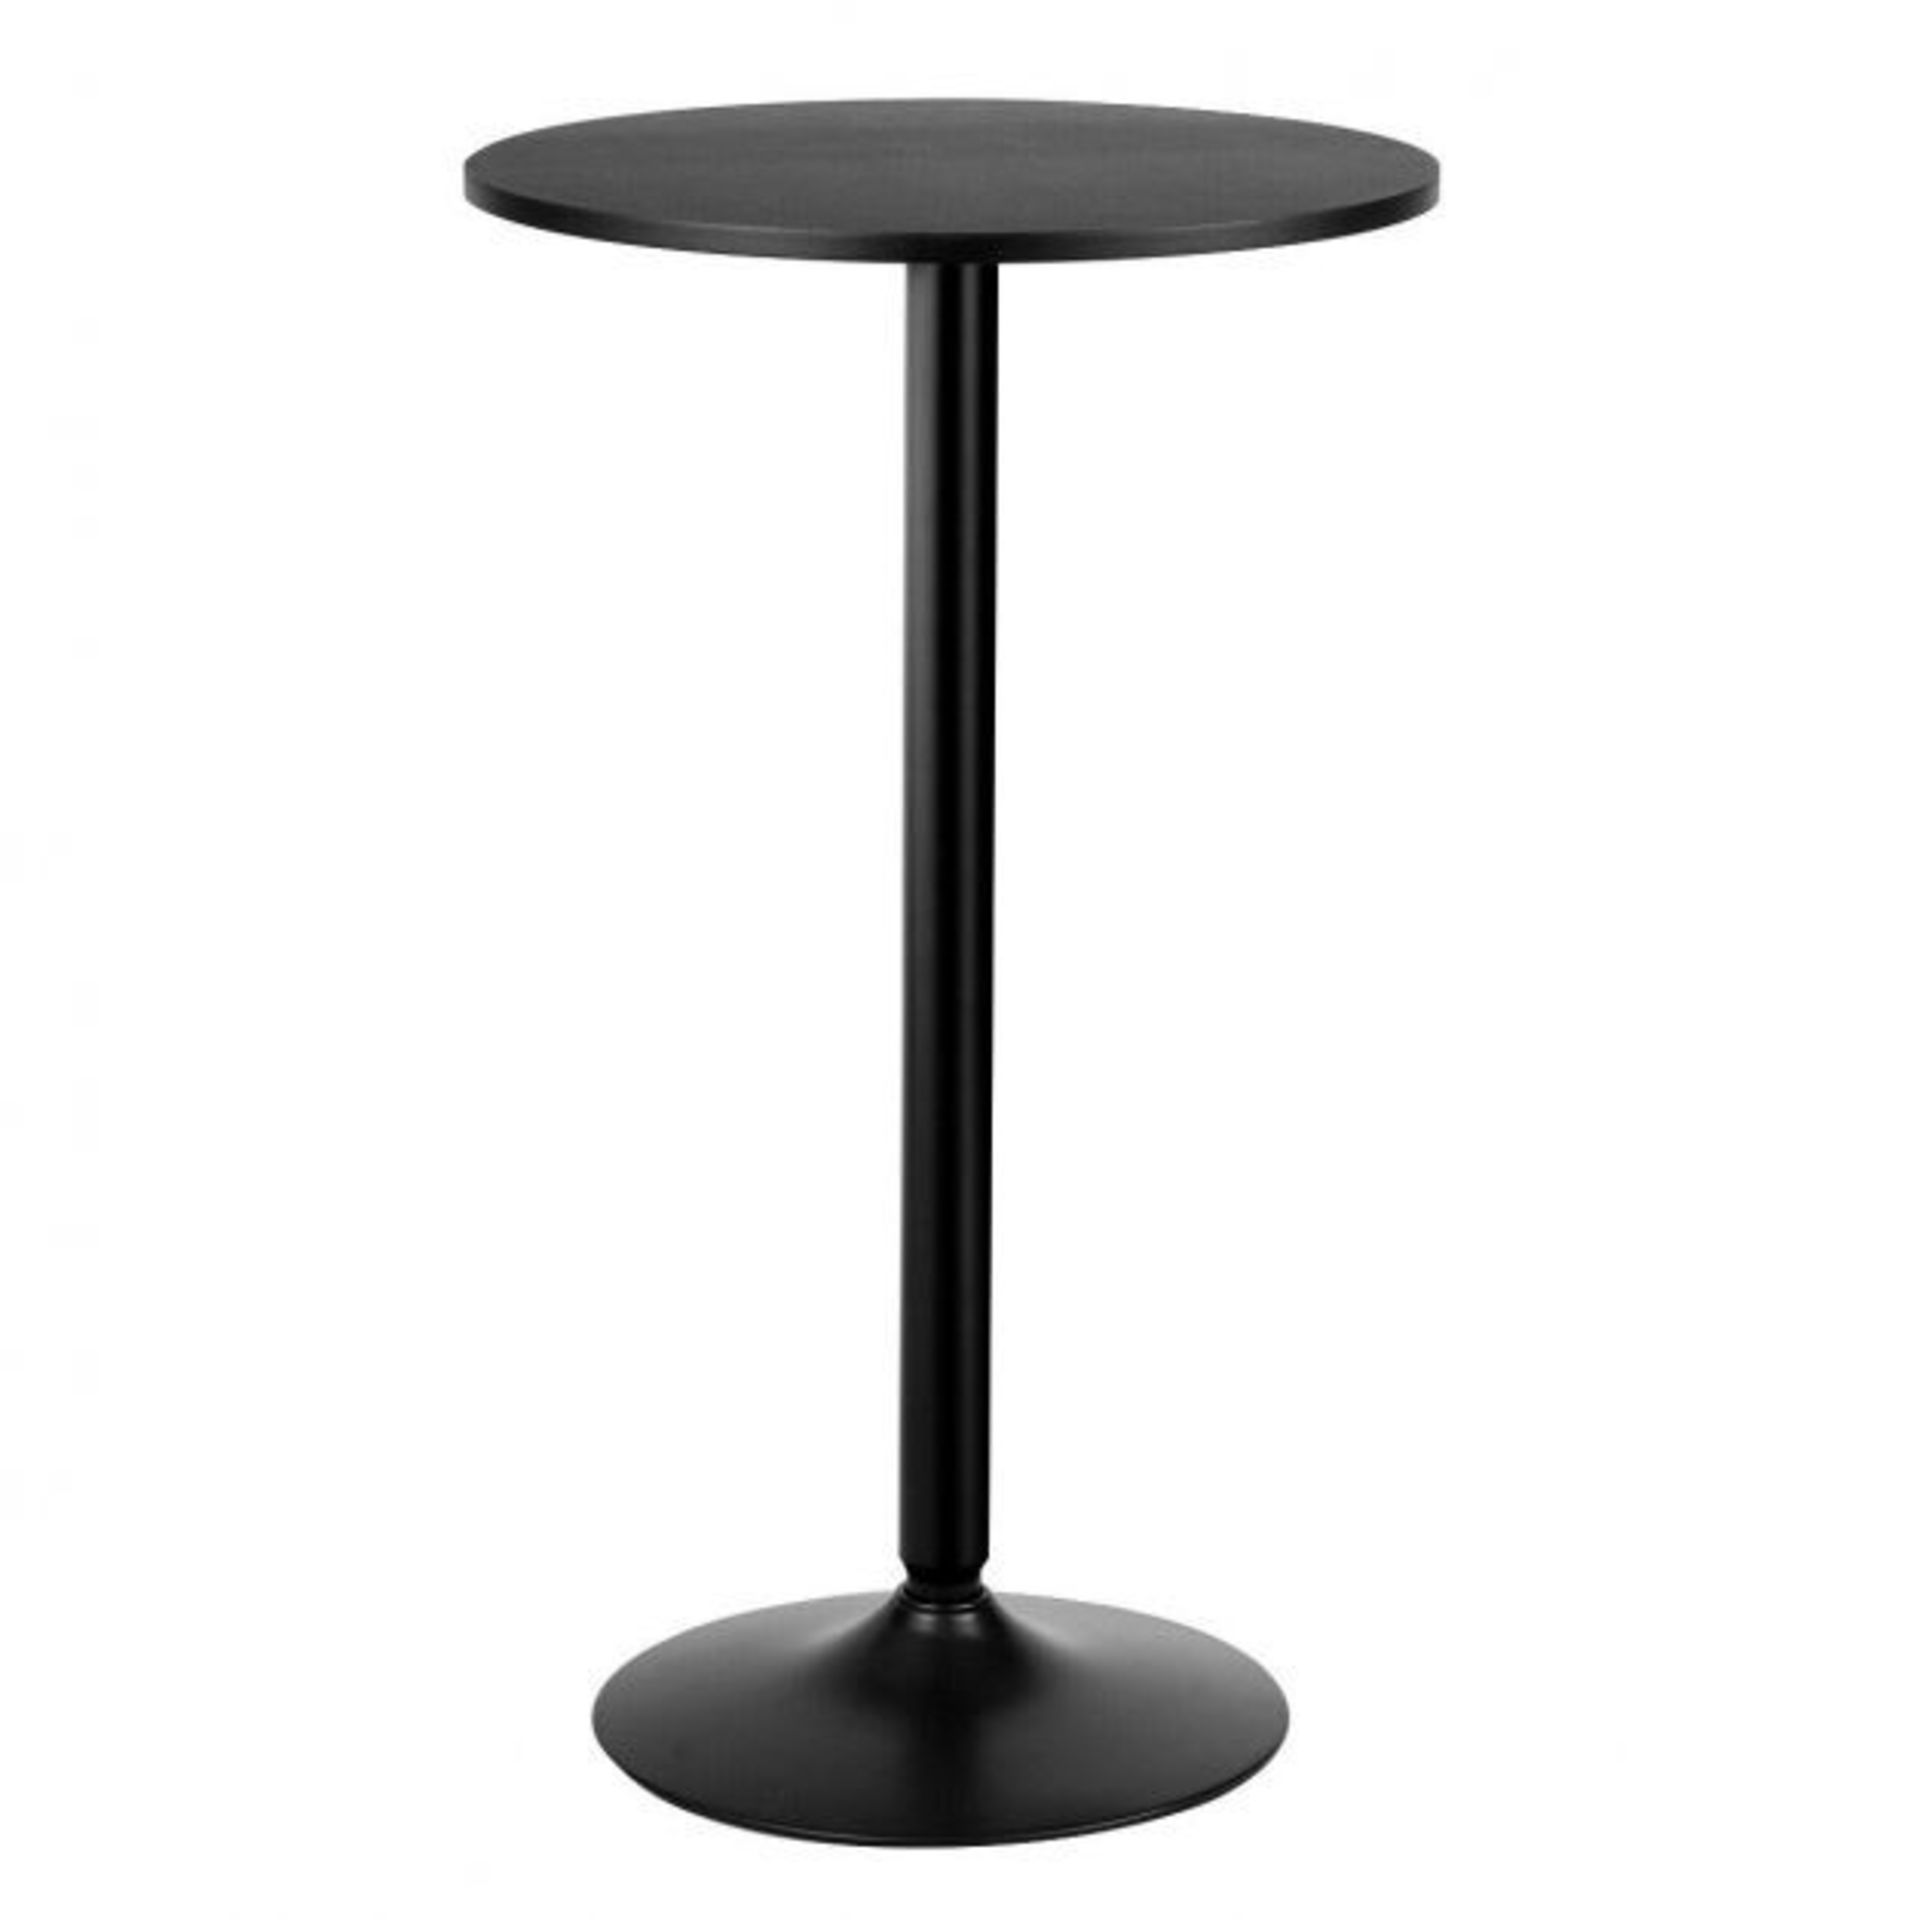 Modern Bar Table with Round Top for Living Room, Restaurant and Bistro. - ER53. This 3-piece pub